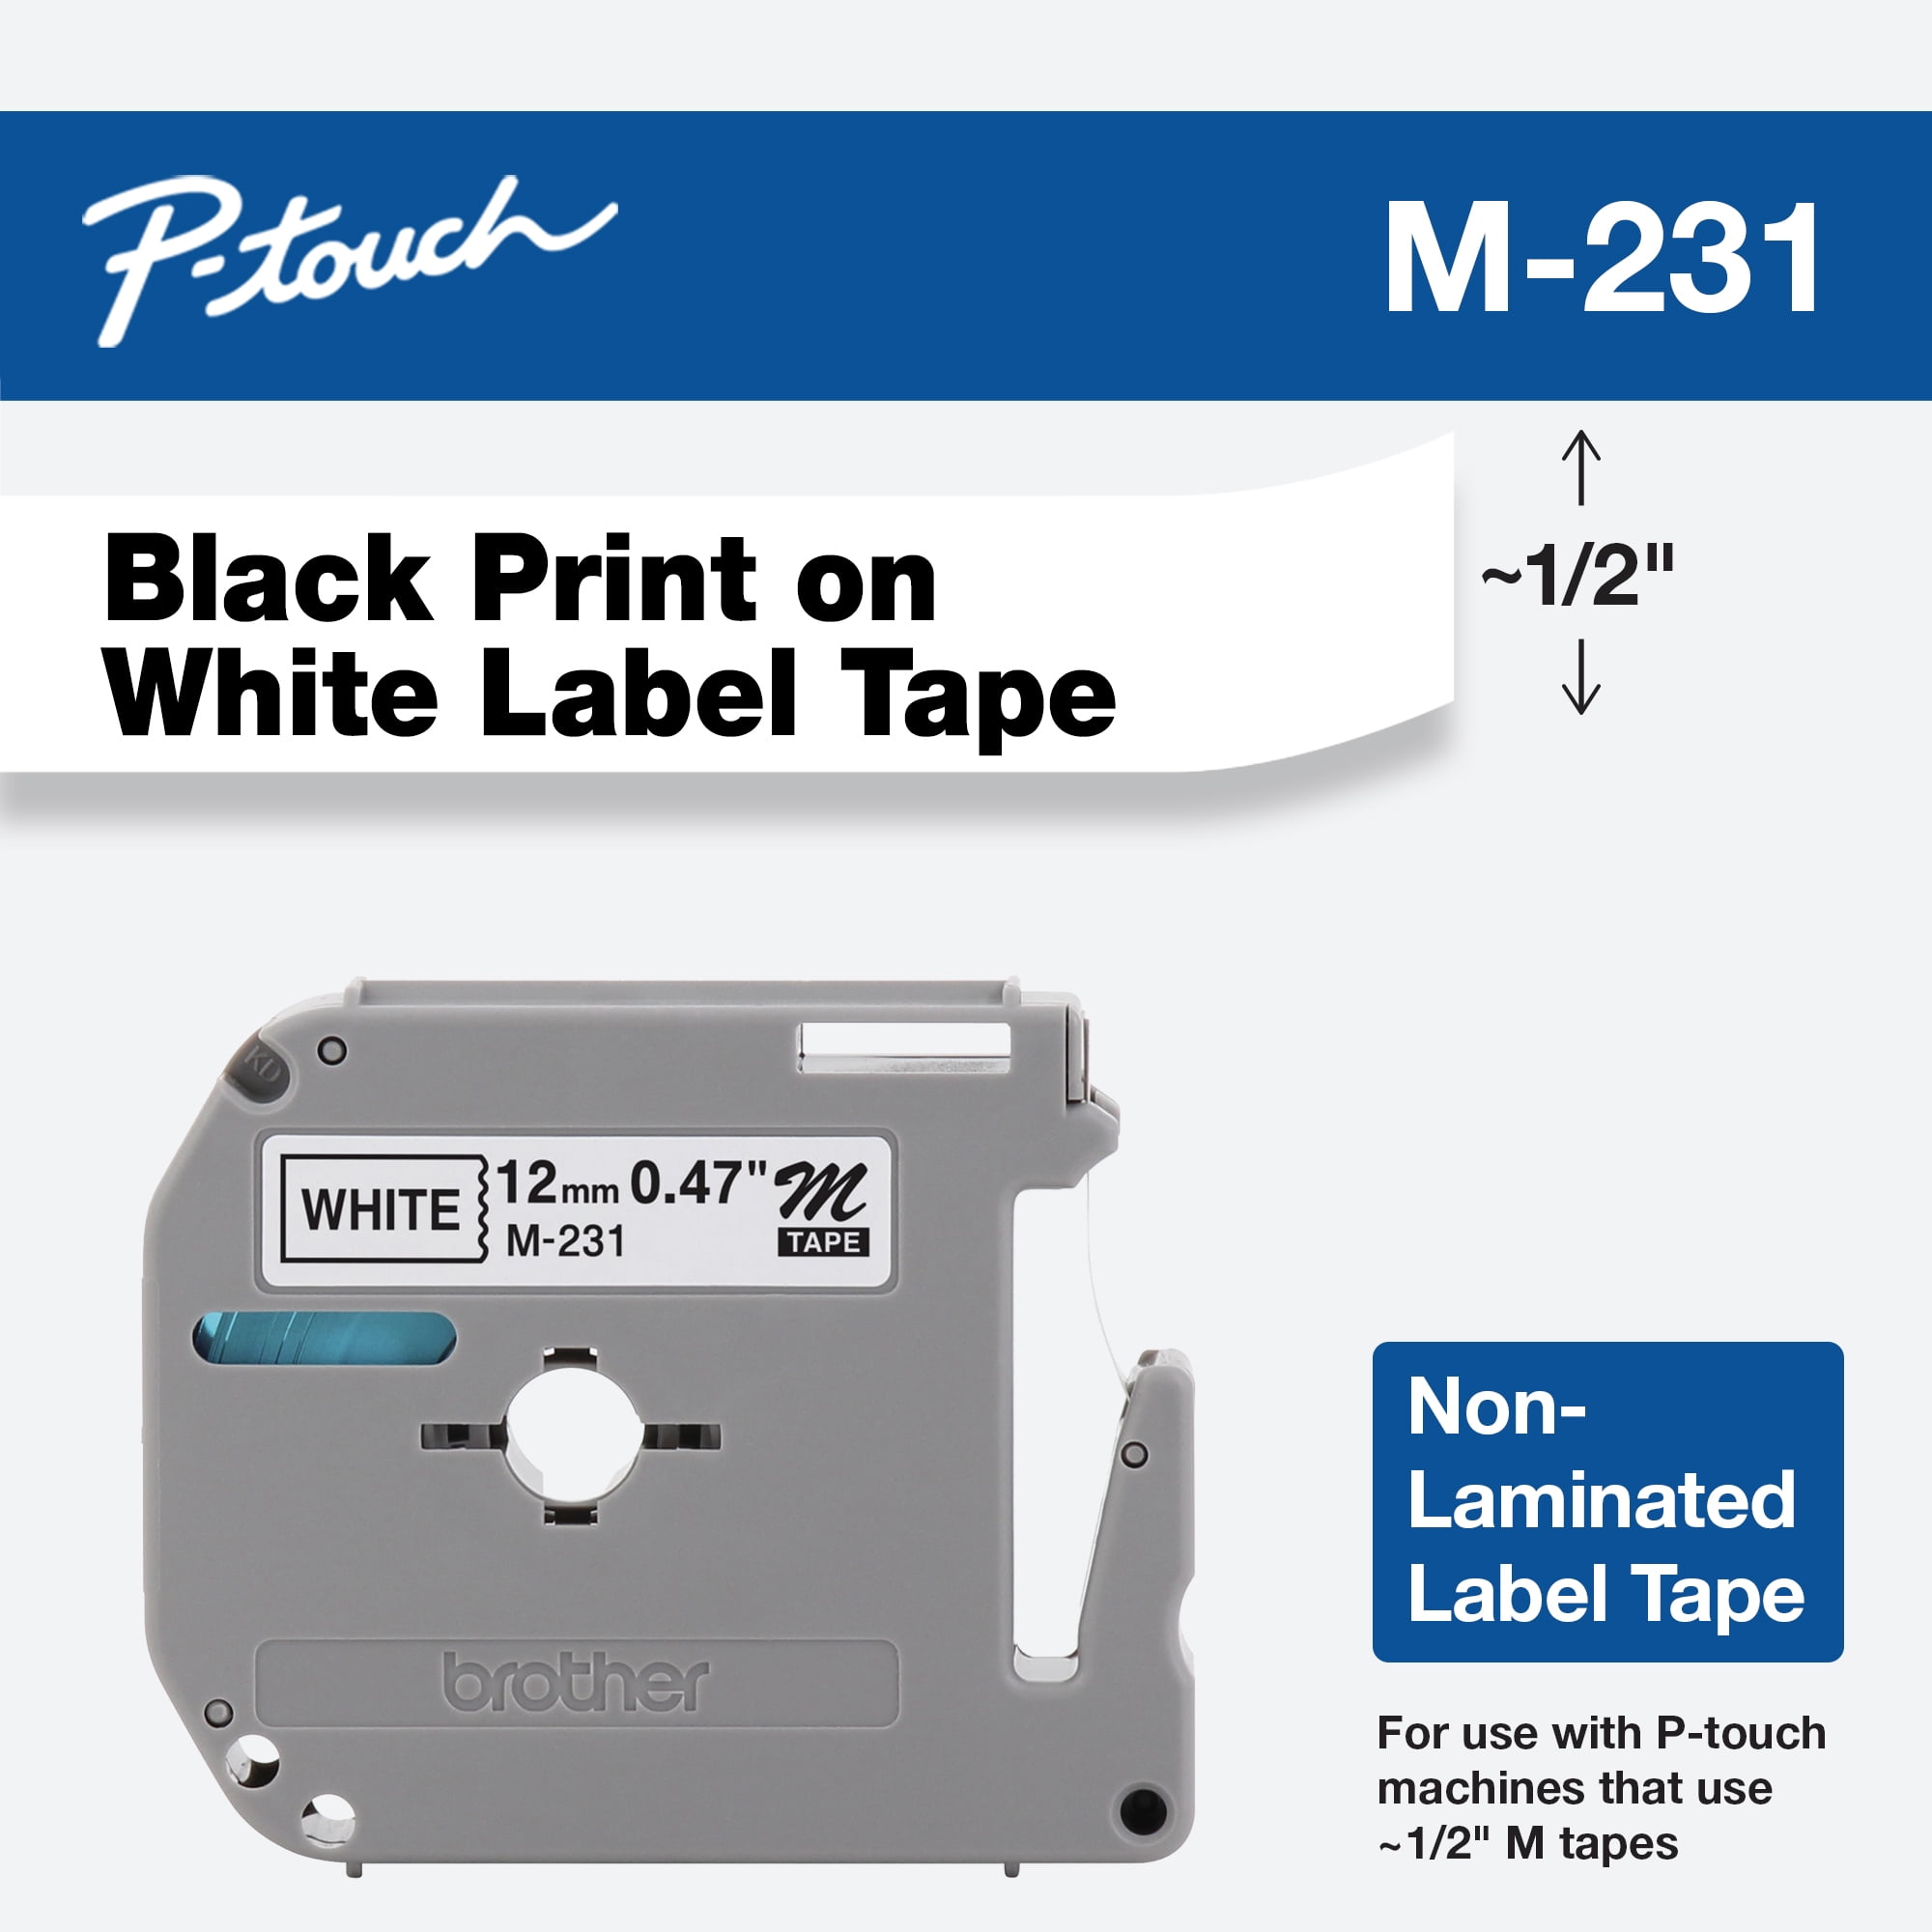 5X Compatible Label Tape Replacement for Brother P Touch MK231 M231 Black on White Label Tape M Tape for Brother P-Touch PT-80 PT-65 PT-90 PT-55 PT-70 PT-75 PT-85 PT-95 12mm x 8m